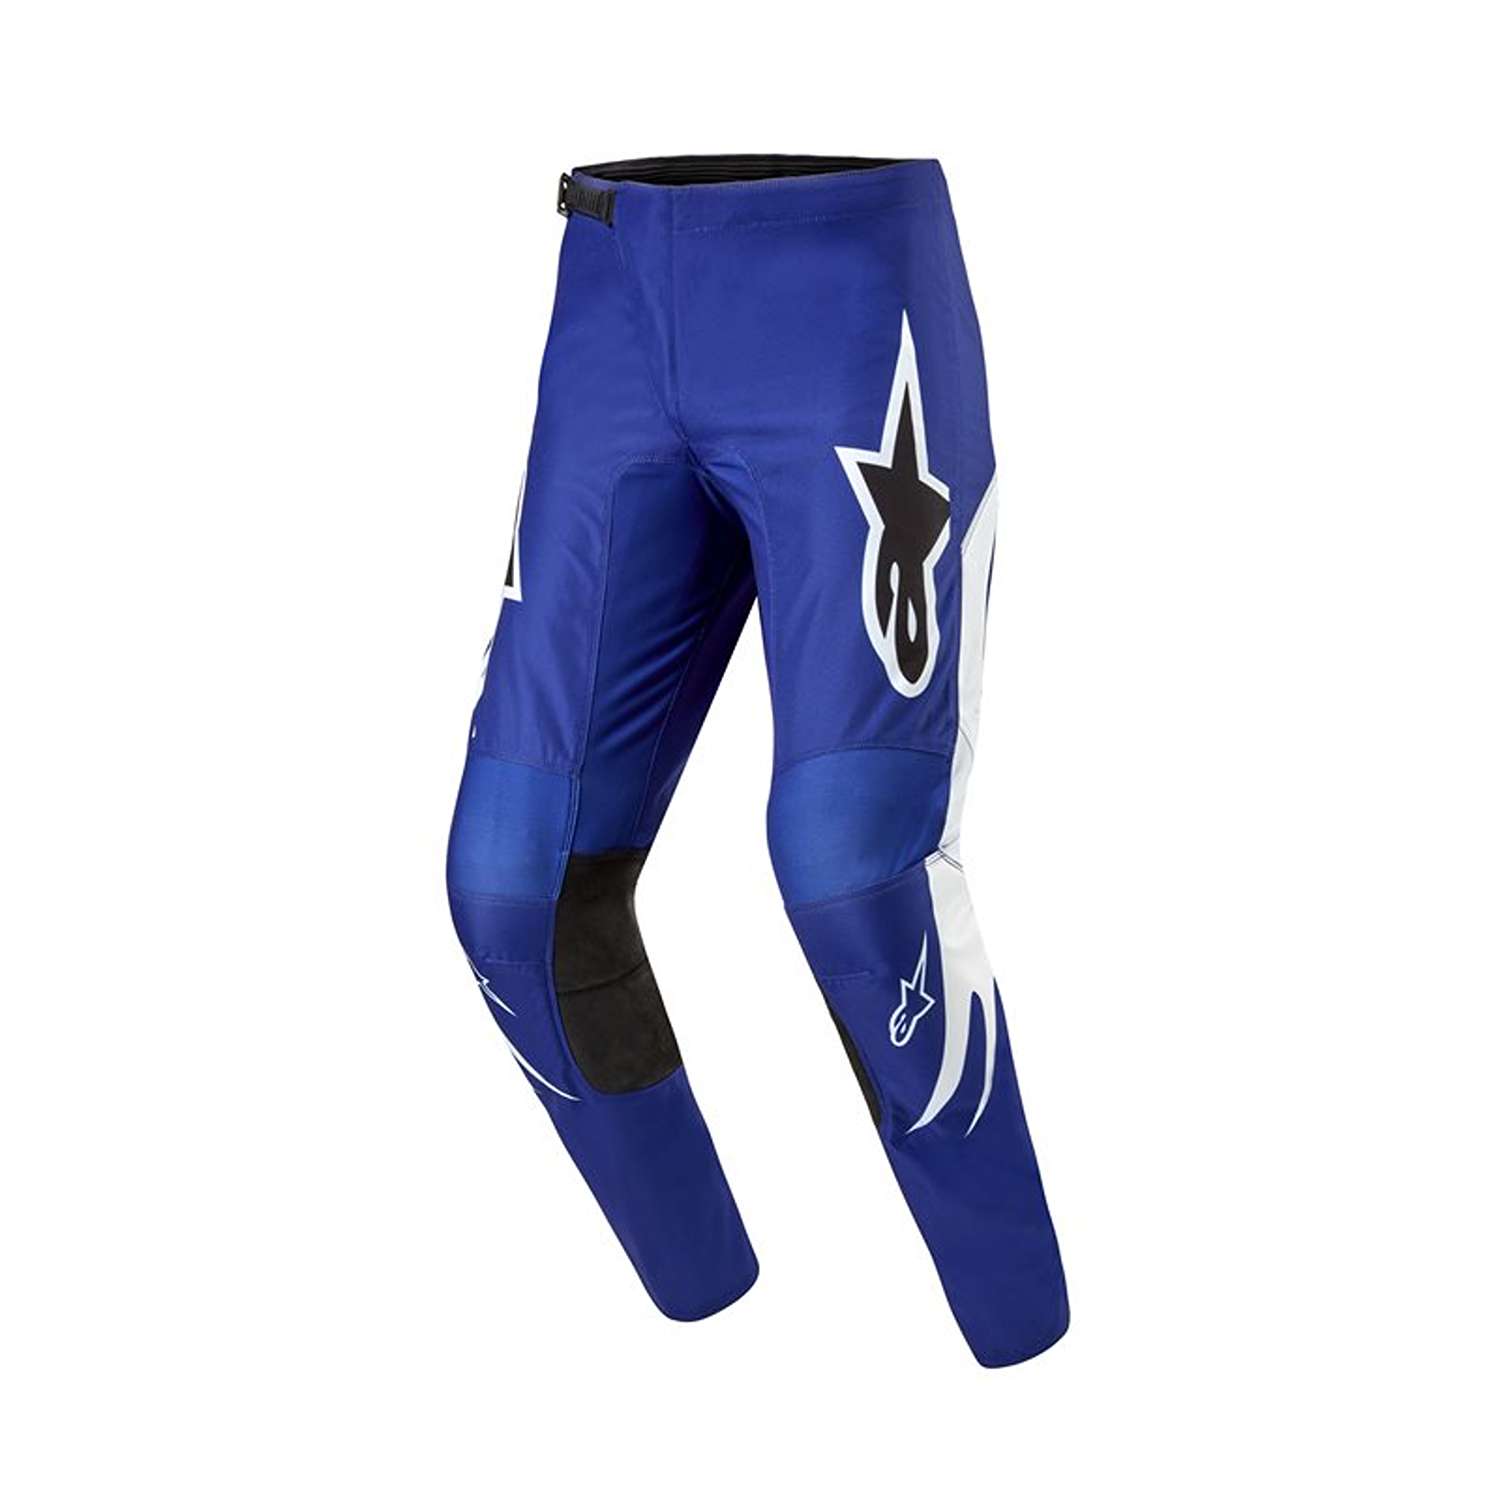 Image of Alpinestars Fluid Lucent Pants Blue Ray White Size 34 ID 8059347266169